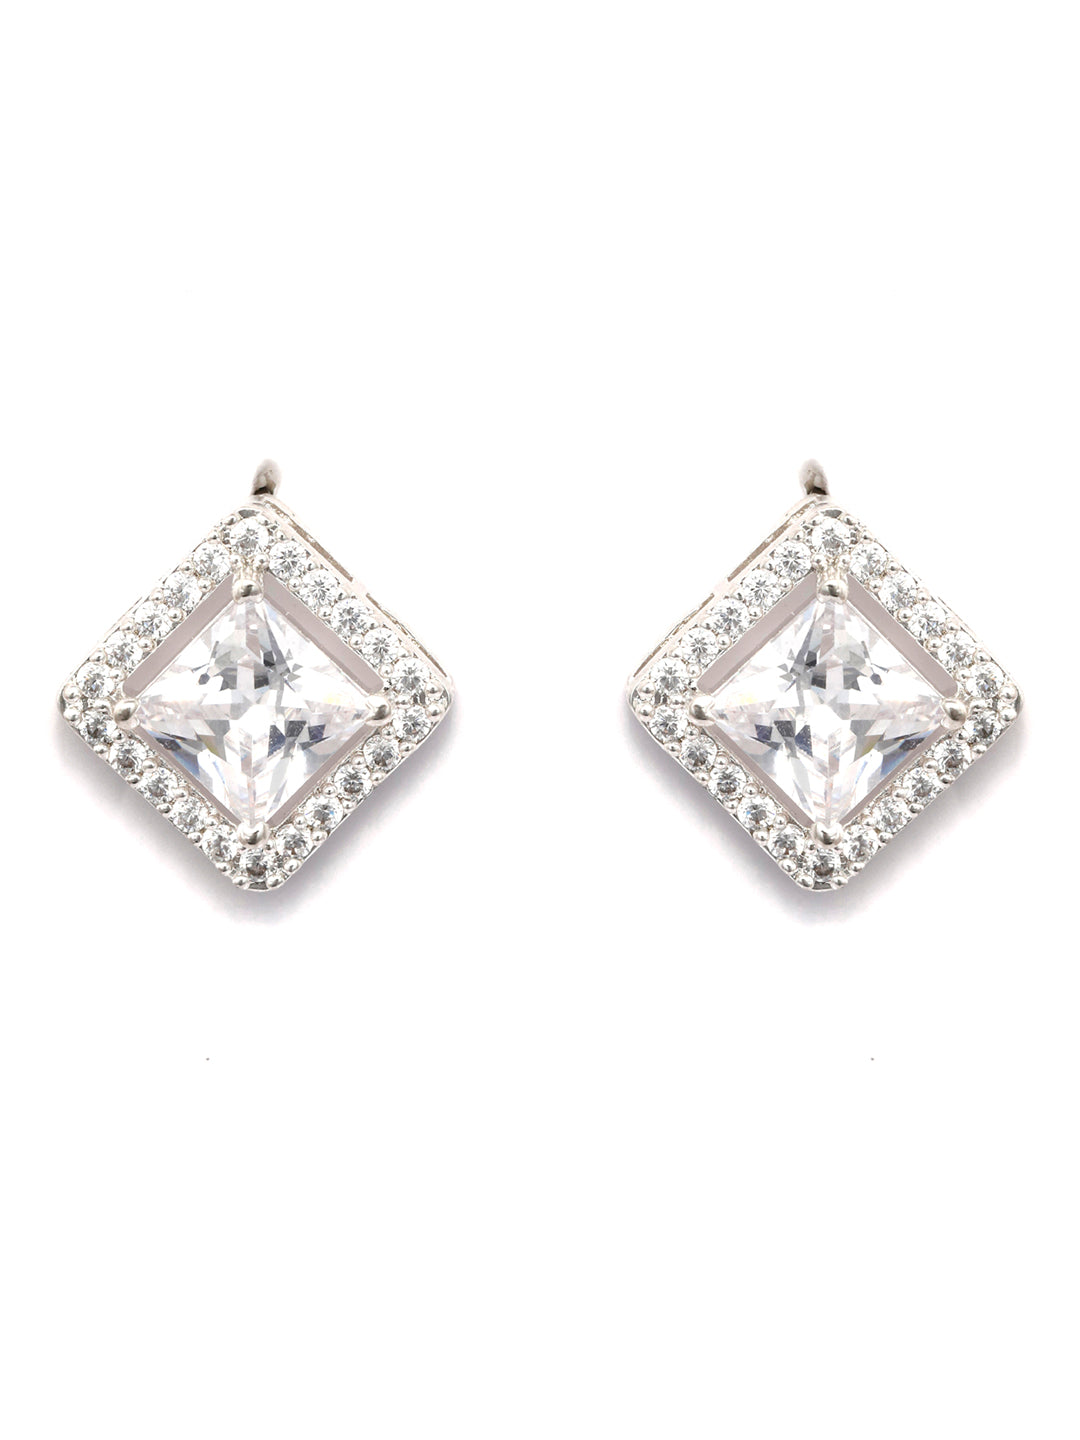 Sterling Silver Square Cubic Zirconia Studs